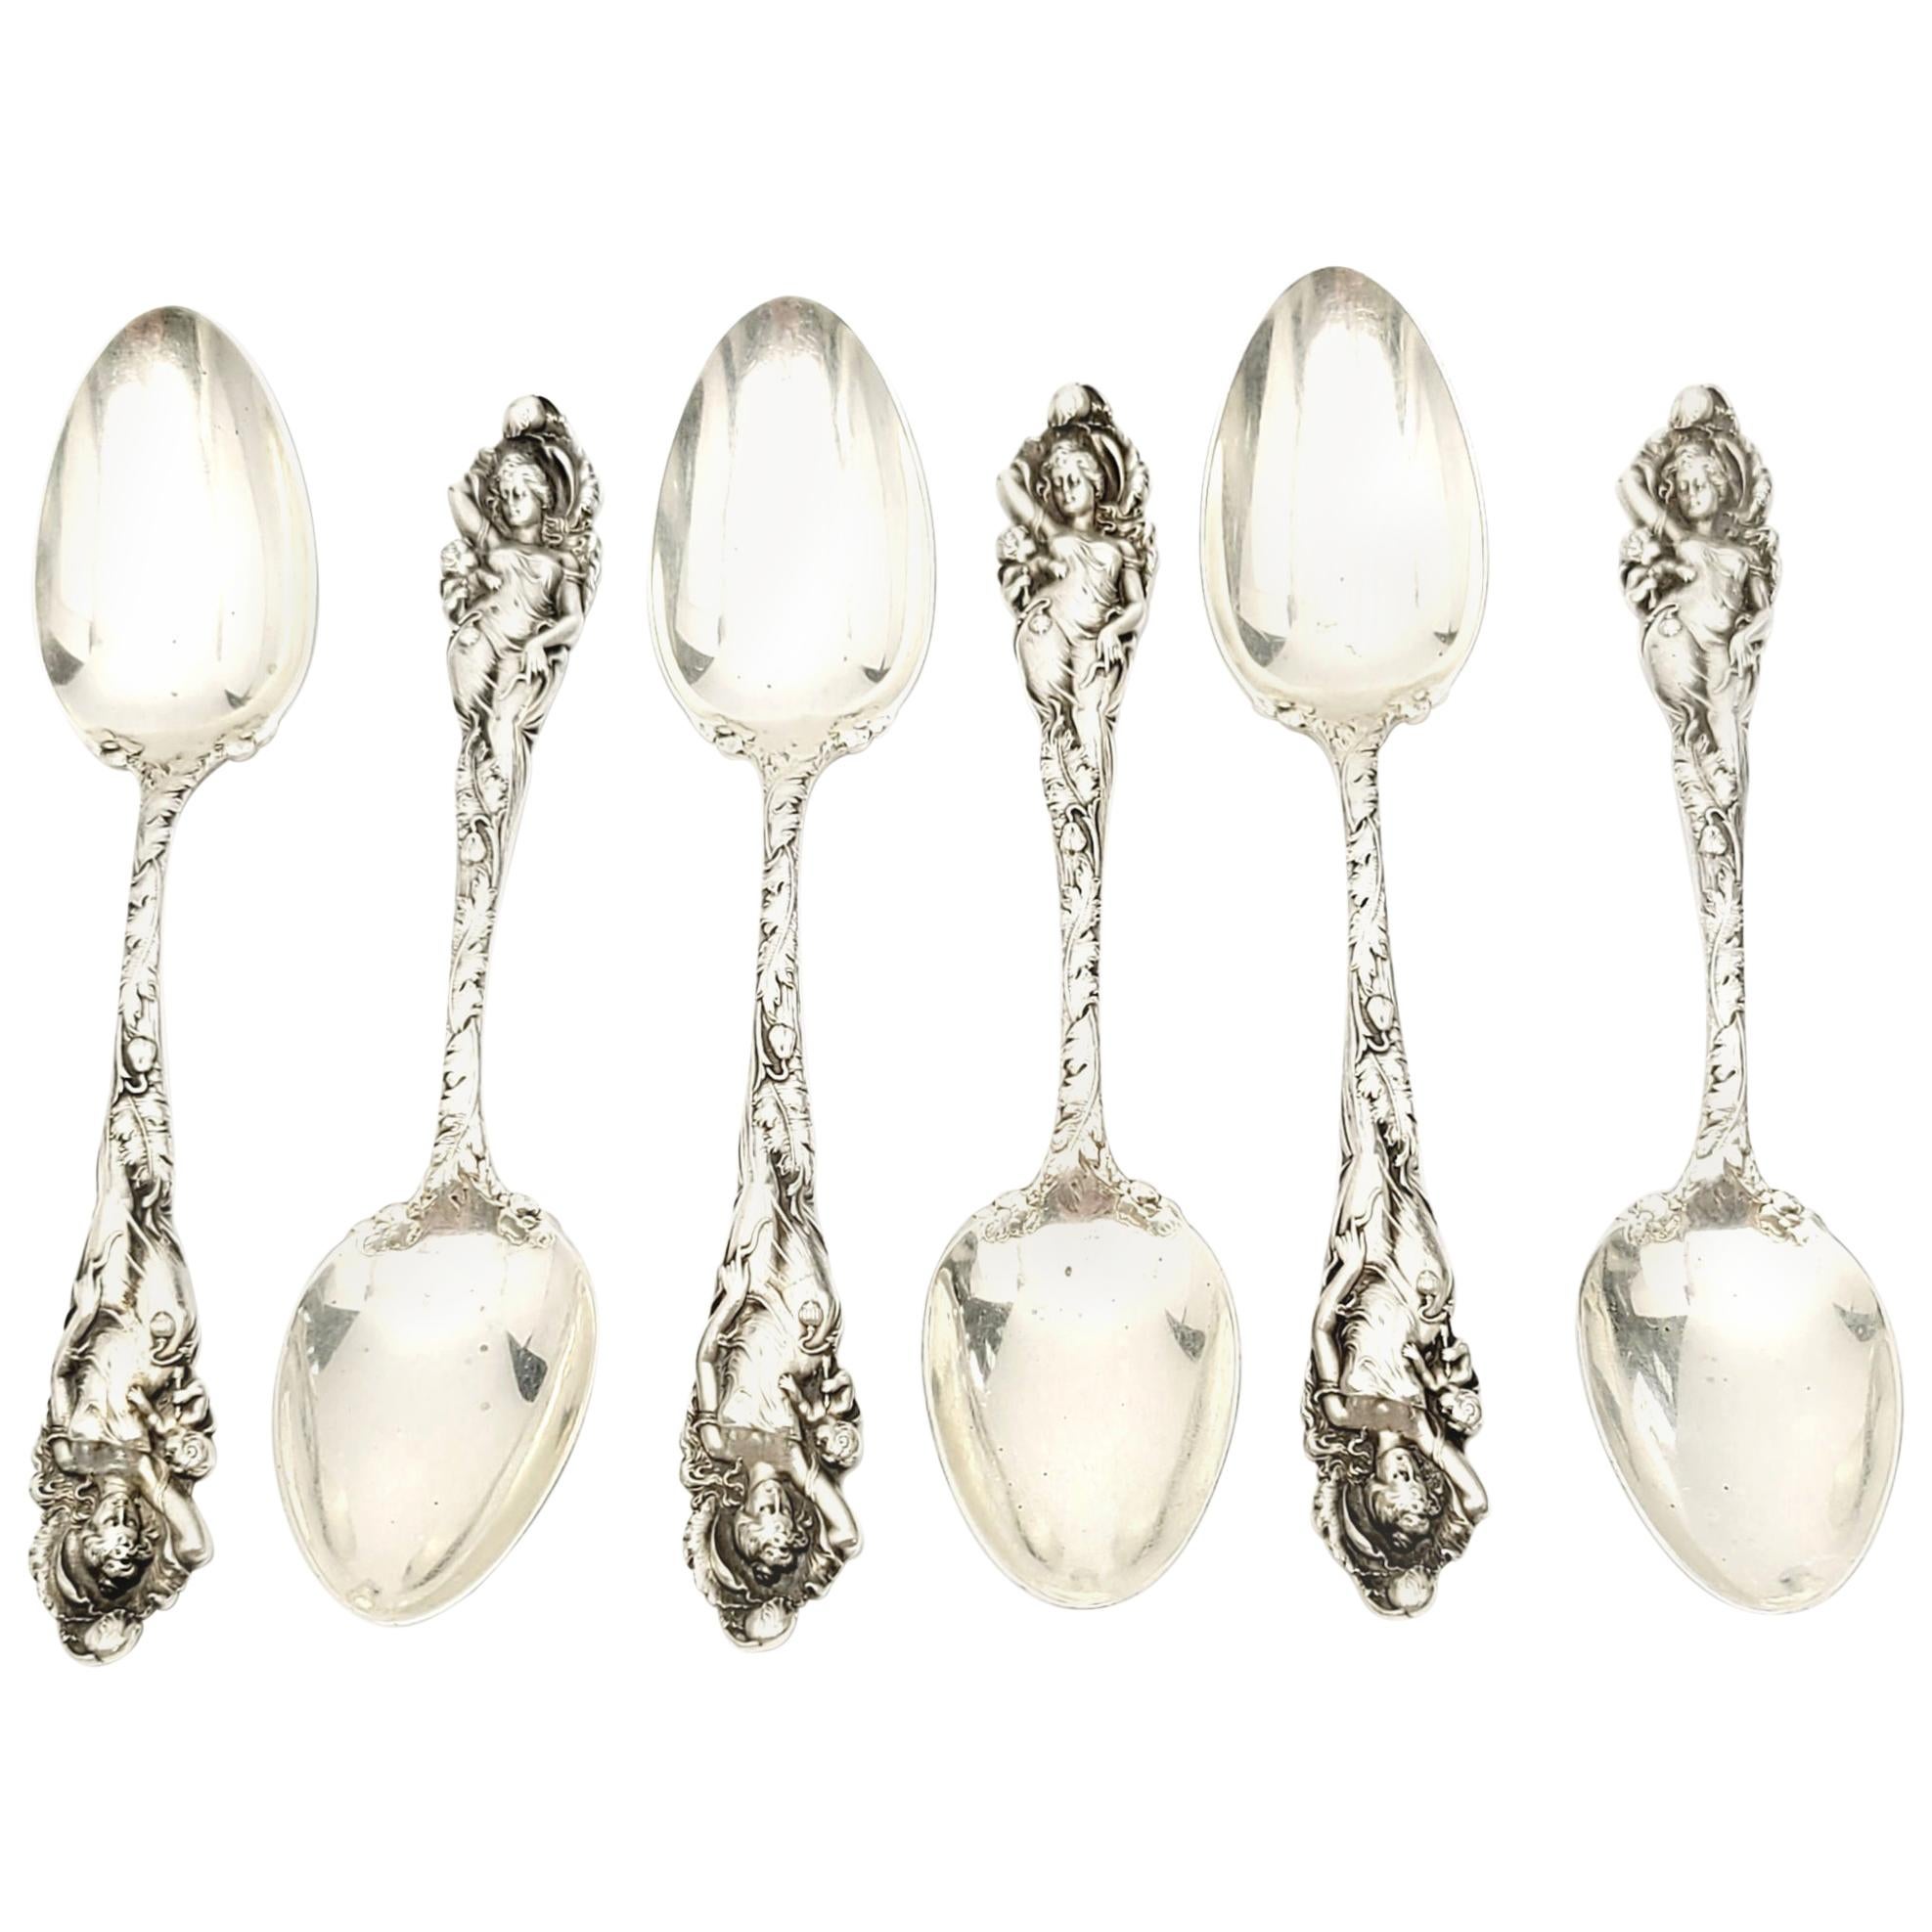 Set of 6 Reed & Barton Sterling Silver Love Disarmed Youth Spoons